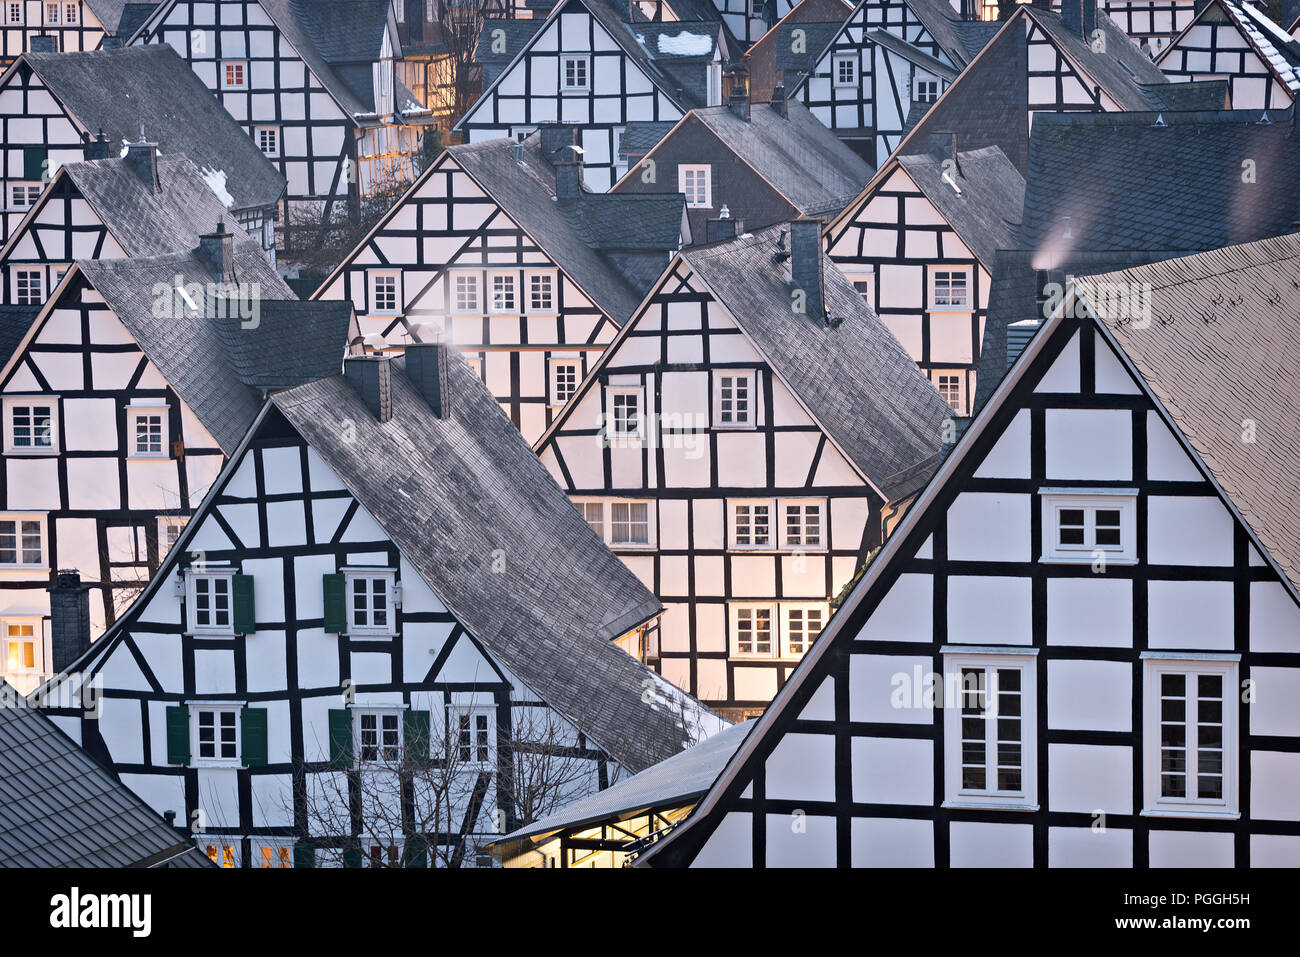 Medieval architecture in half-timbered houses in the colors black and white in Alter Flecken, the center of Freudenberg, Germany. Stock Photo